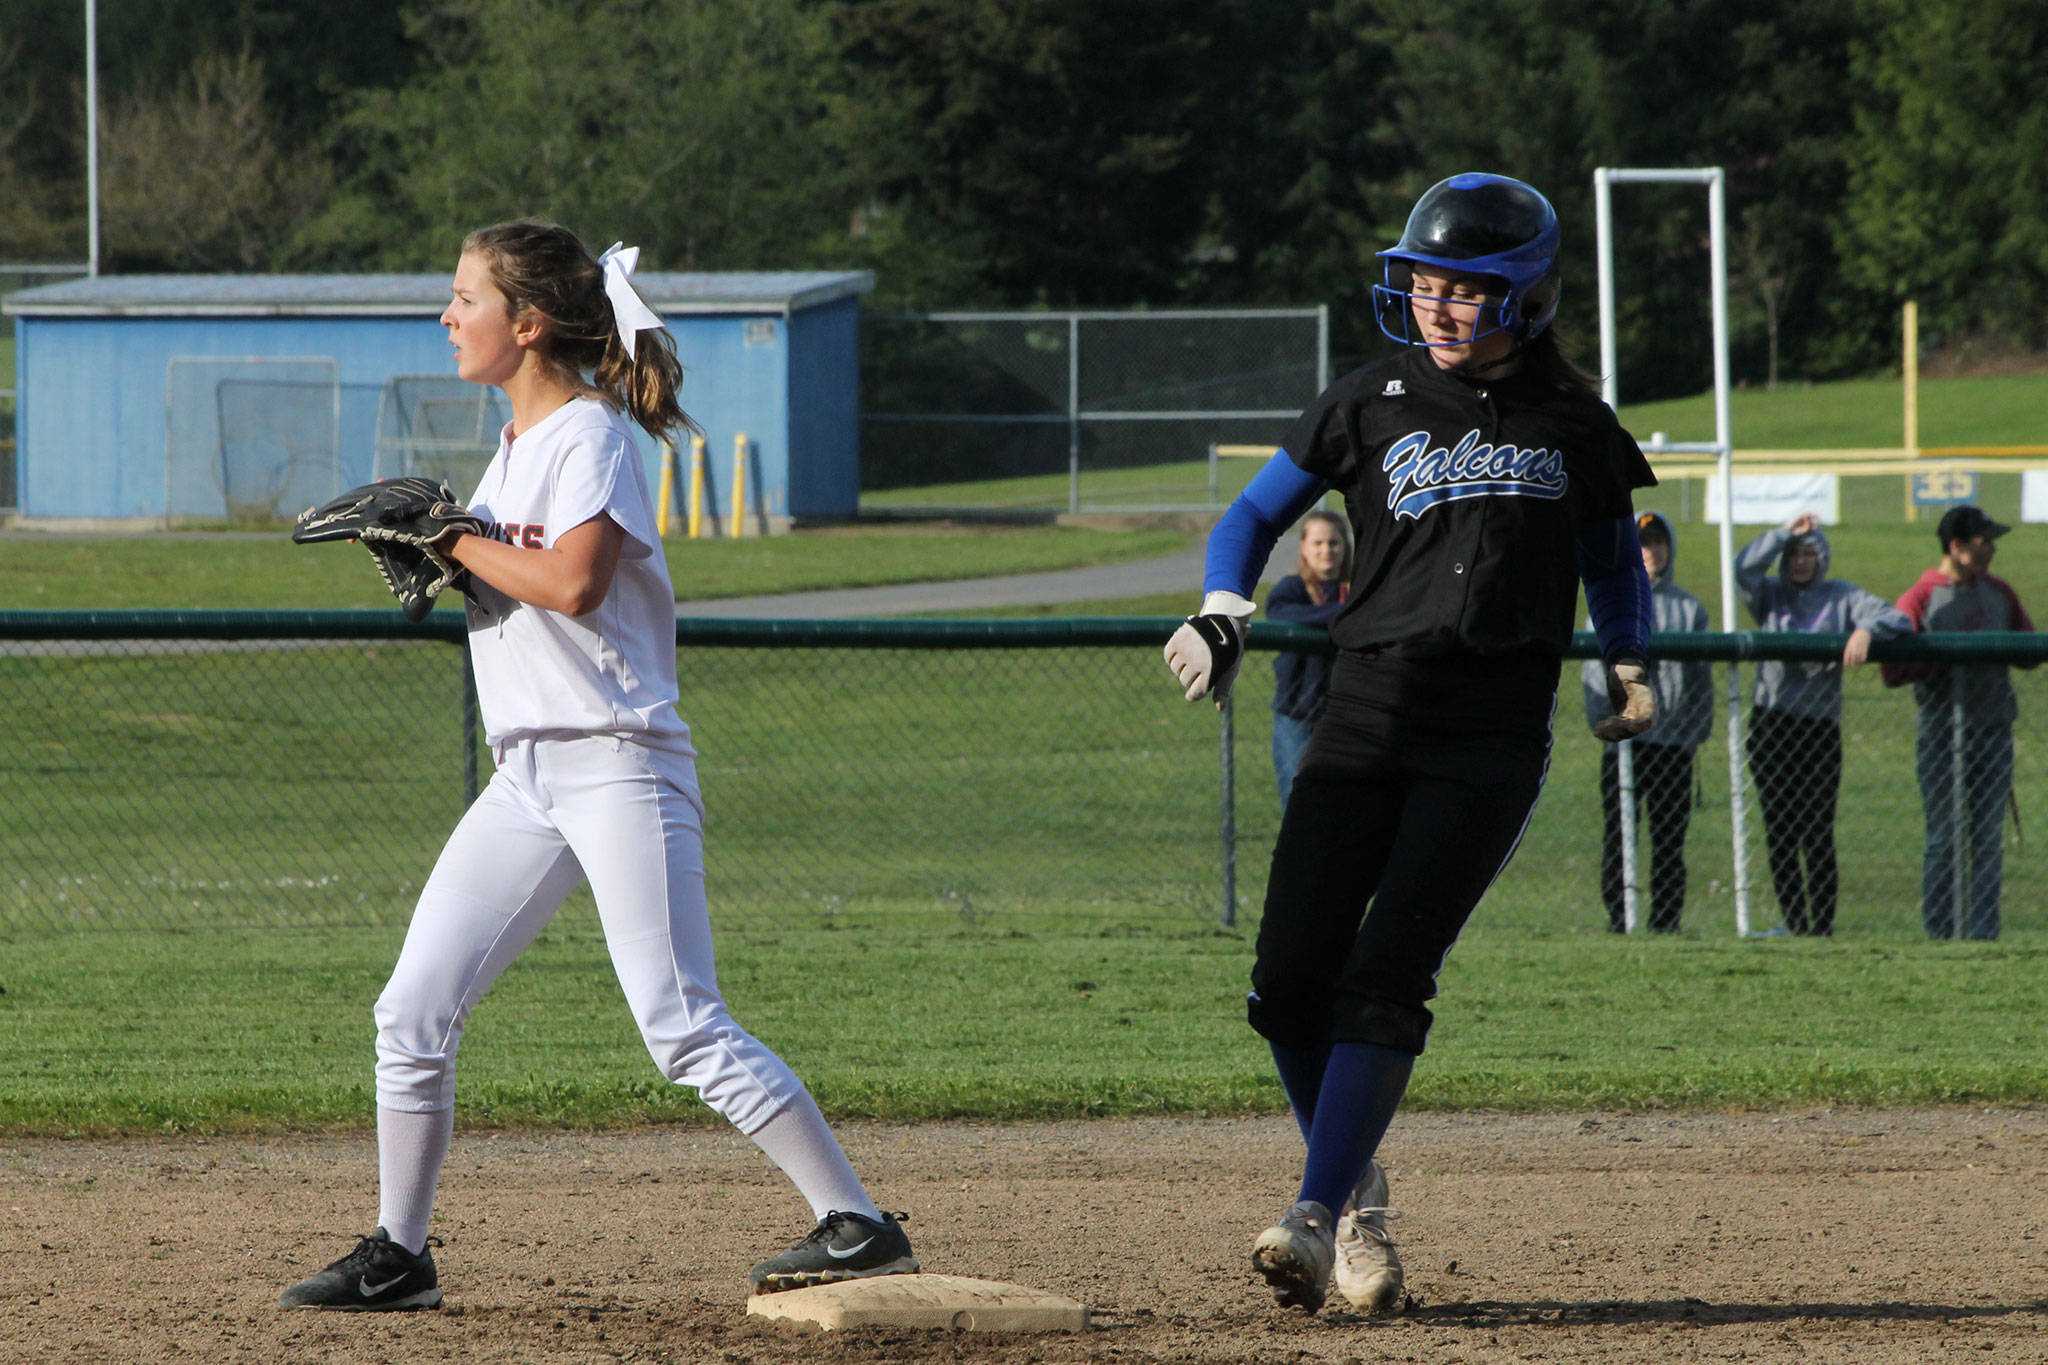 Melody Wilkie cruises into second base with a seventh-inning double in Monday’s game with Archbishop Murphy. (Photo by Jim Waller/Whidbey News Group)